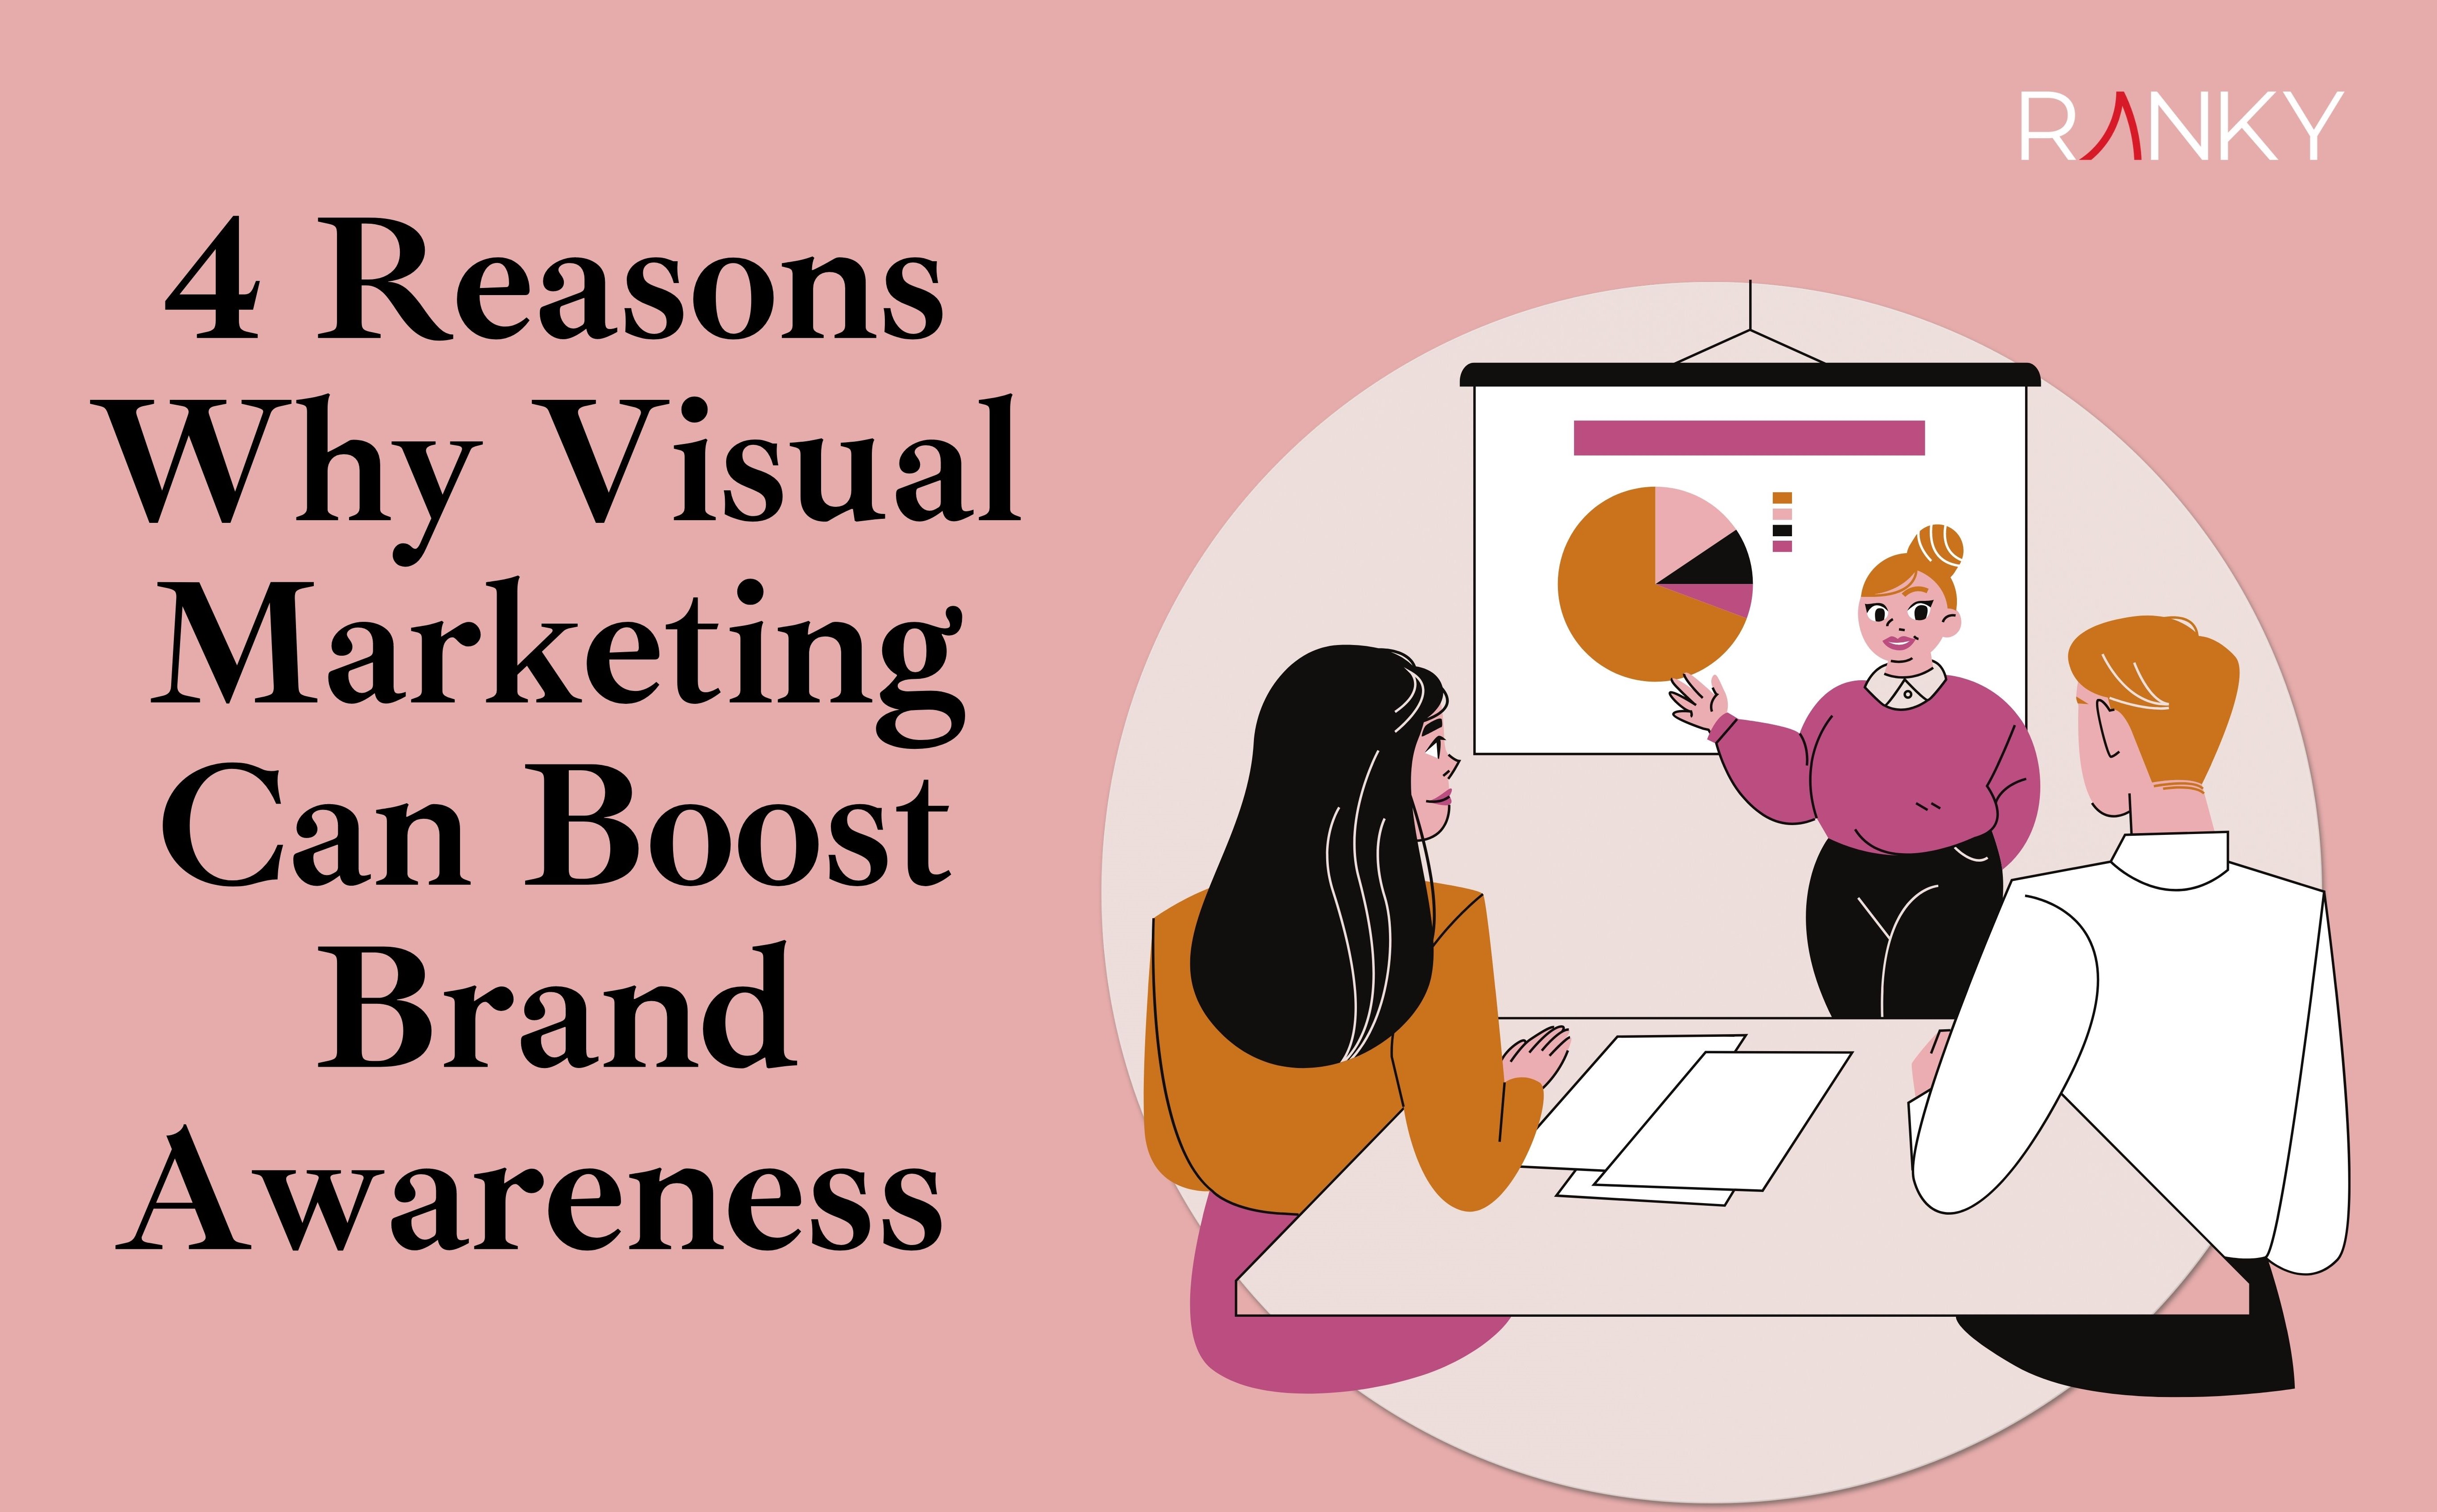 How Visual Marketing Can Boost Brand Awareness